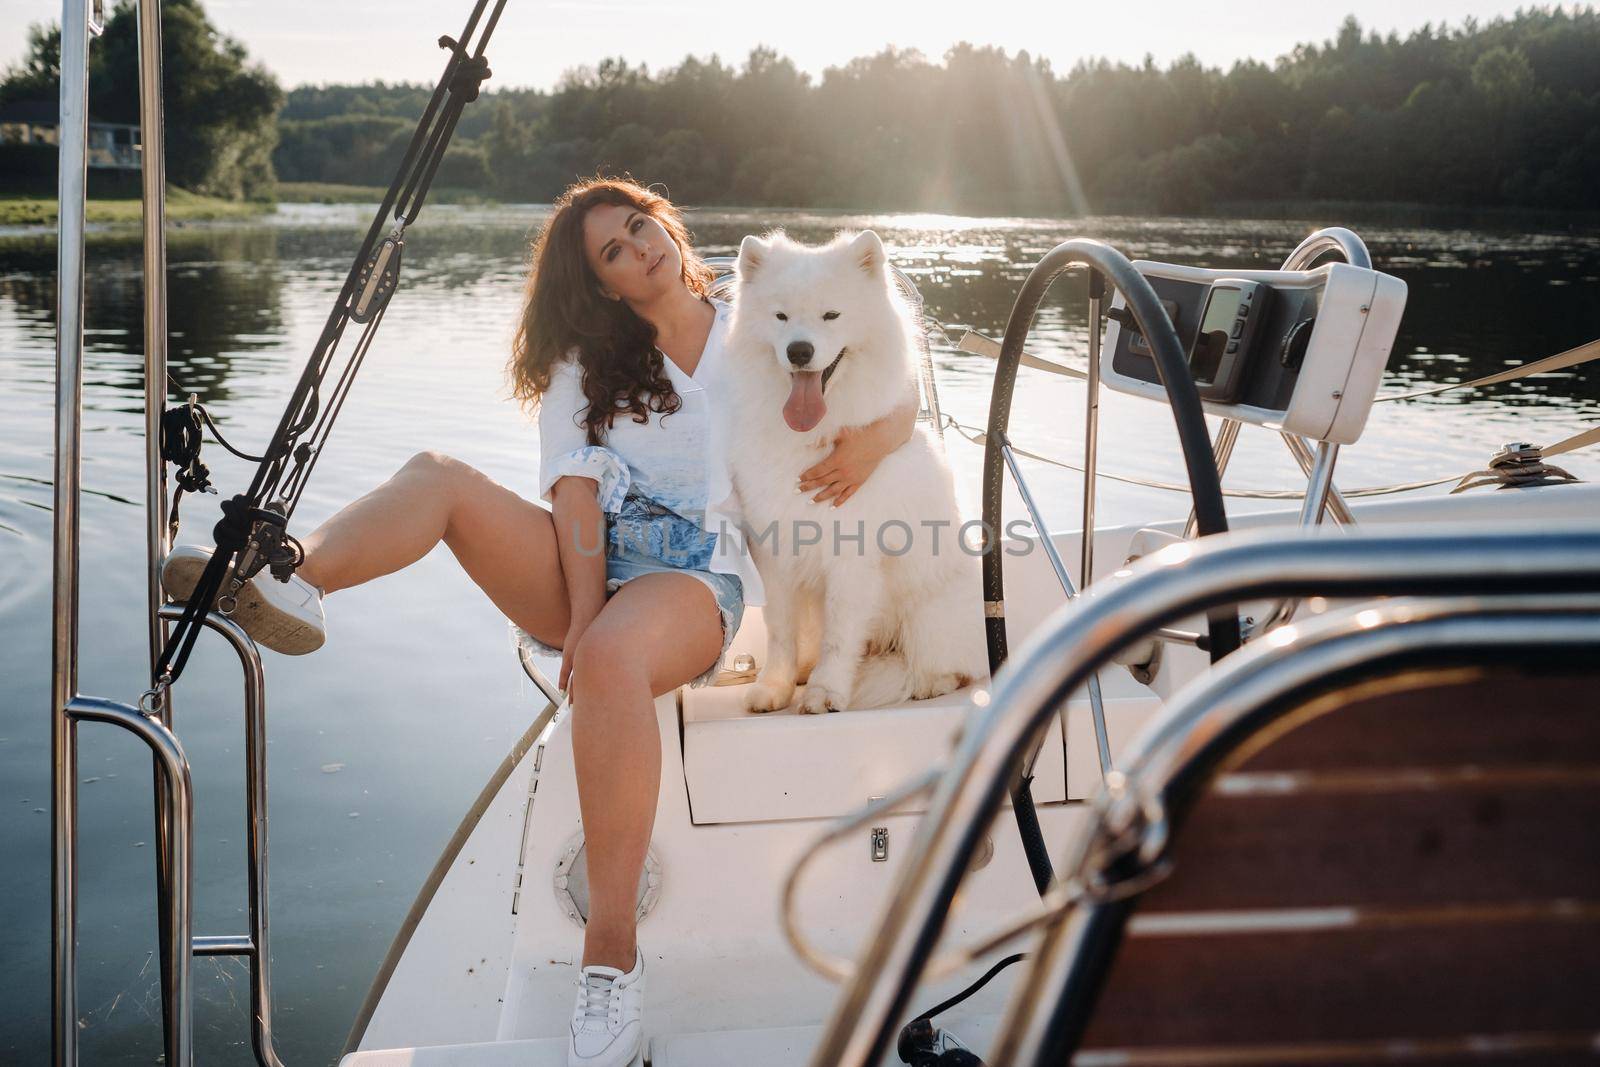 a happy woman with a big white dog on a white yacht in the sea.